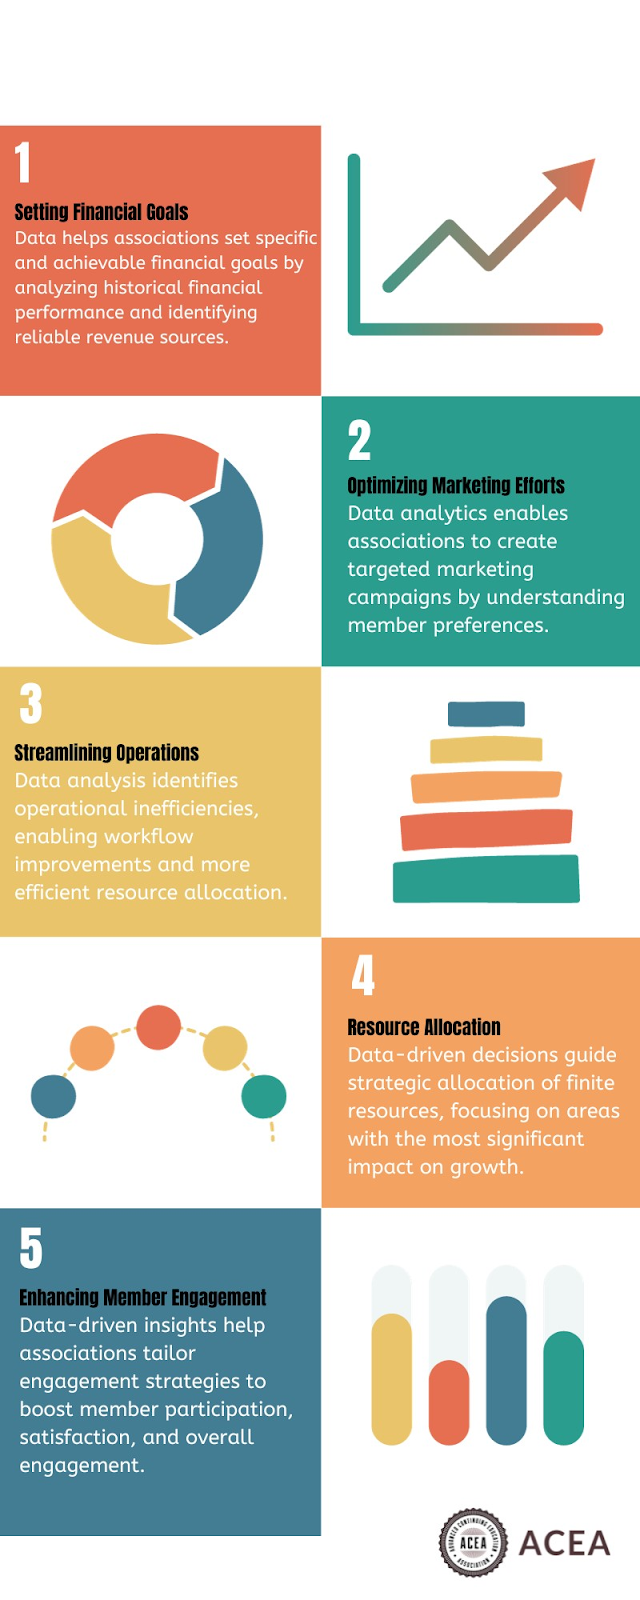 5 key benefits of data and analytics for Associations